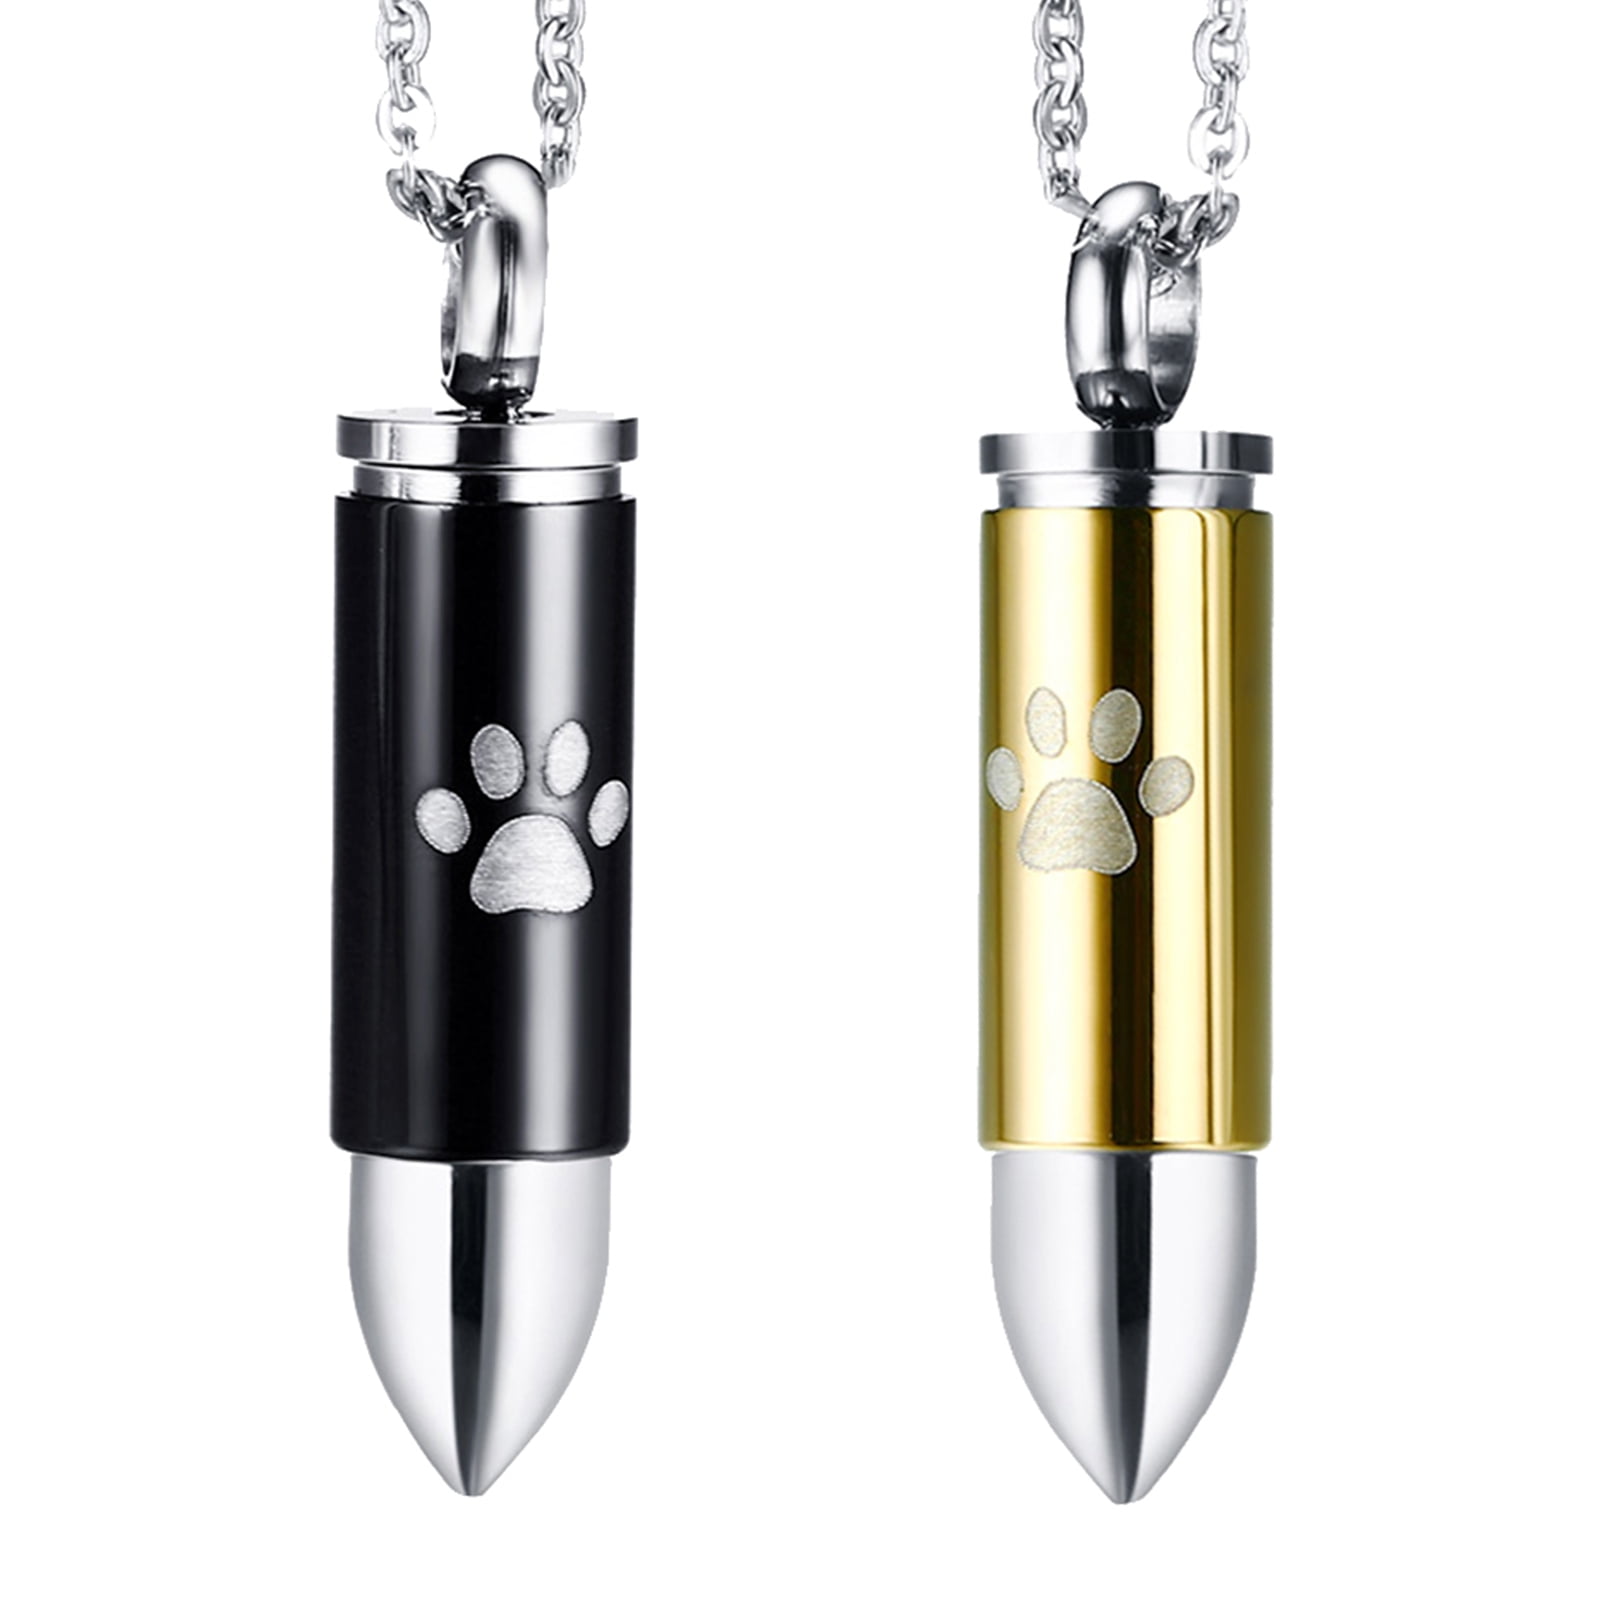 HUANIAN Stainless Steel The Bullet Urn Necklace for The Dog paw Keepsake Memorial Cremation Jewelry 